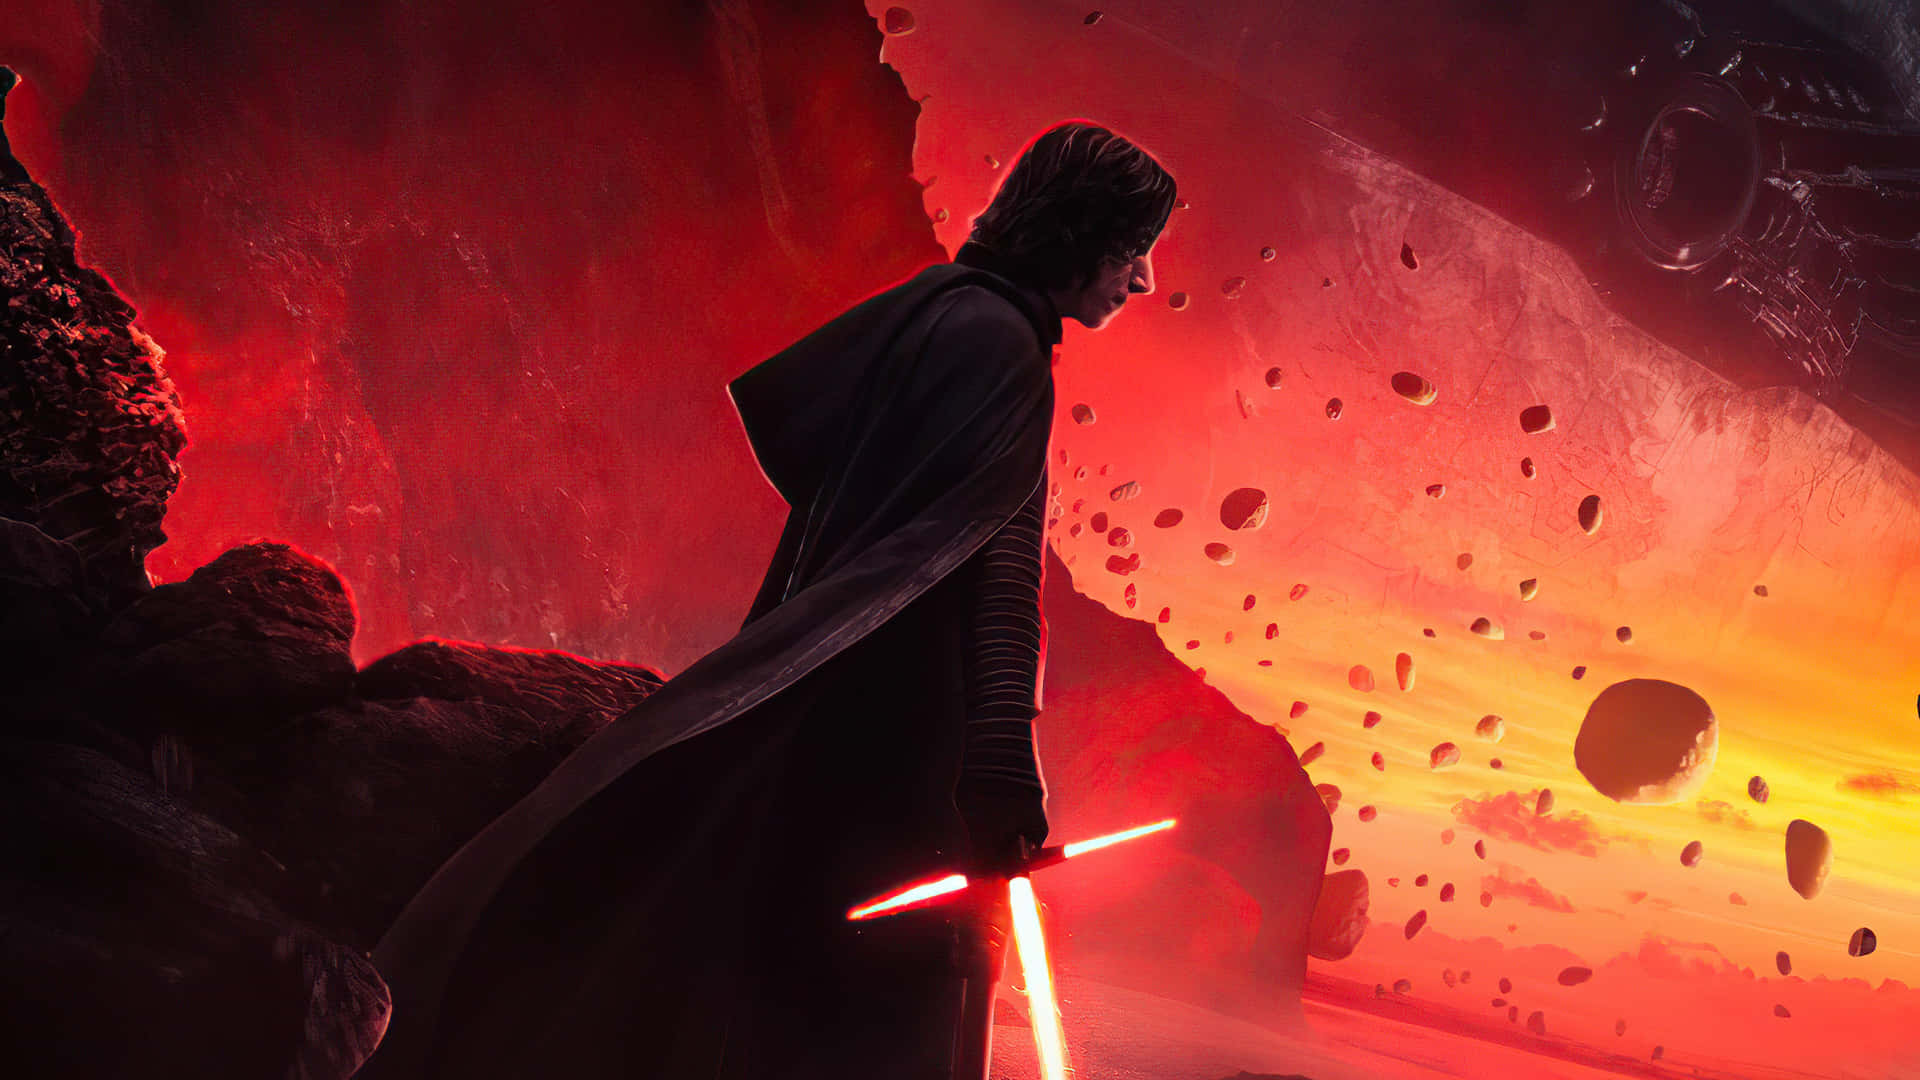 The star of the next installment of Star Wars, Kylo Ren, in all his glory. Wallpaper